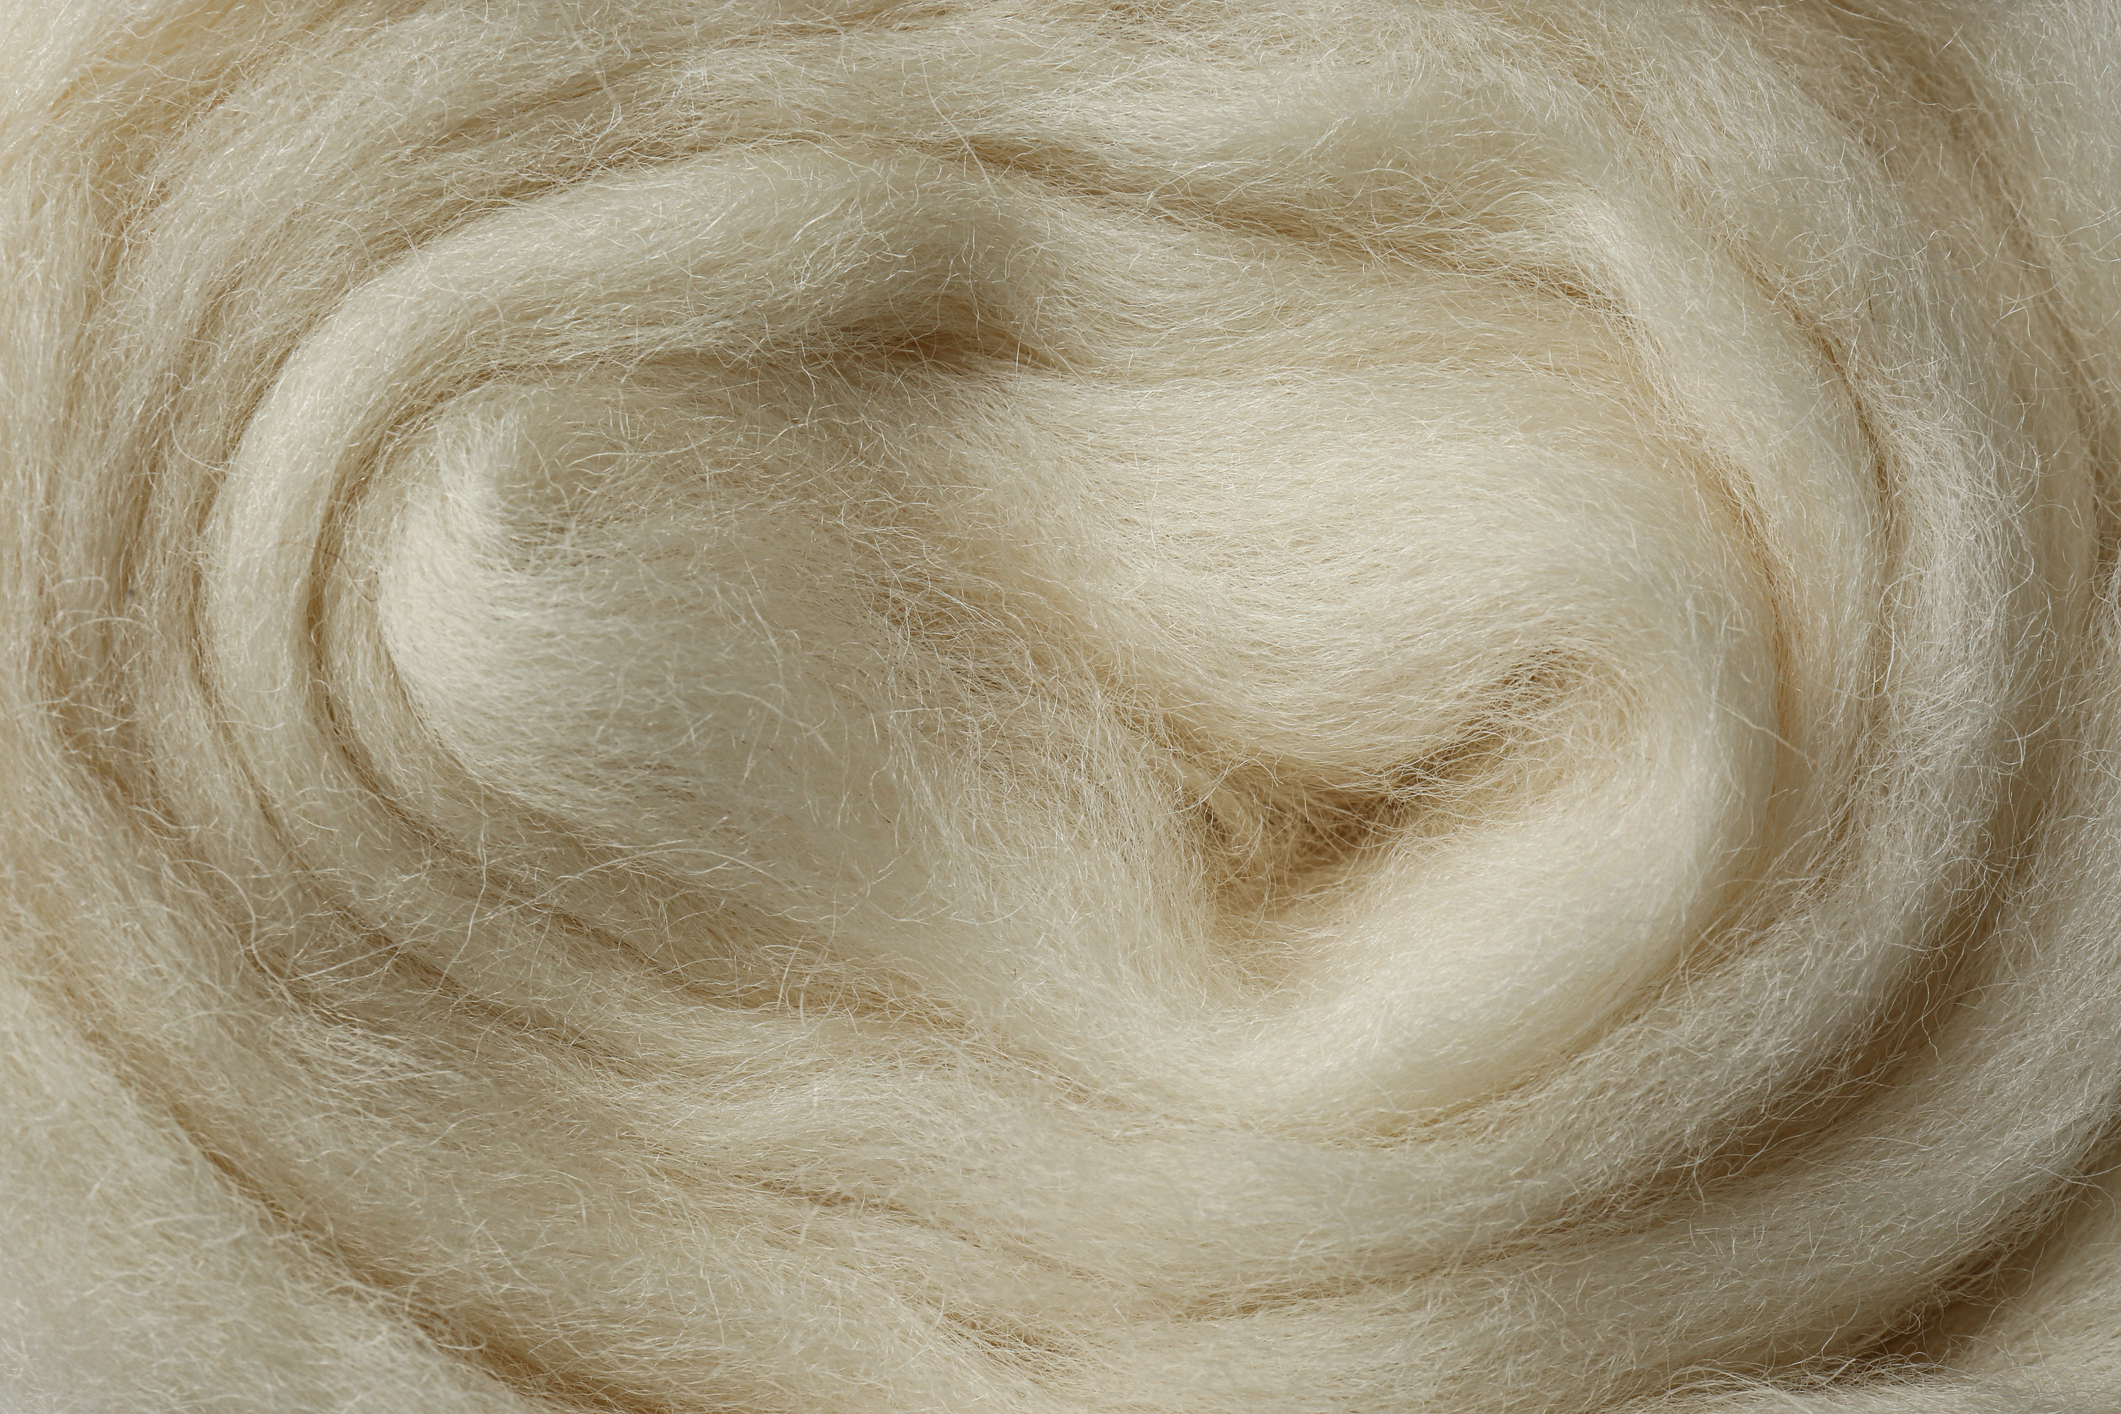 combed wool fabric which can be used for organic wool clothing